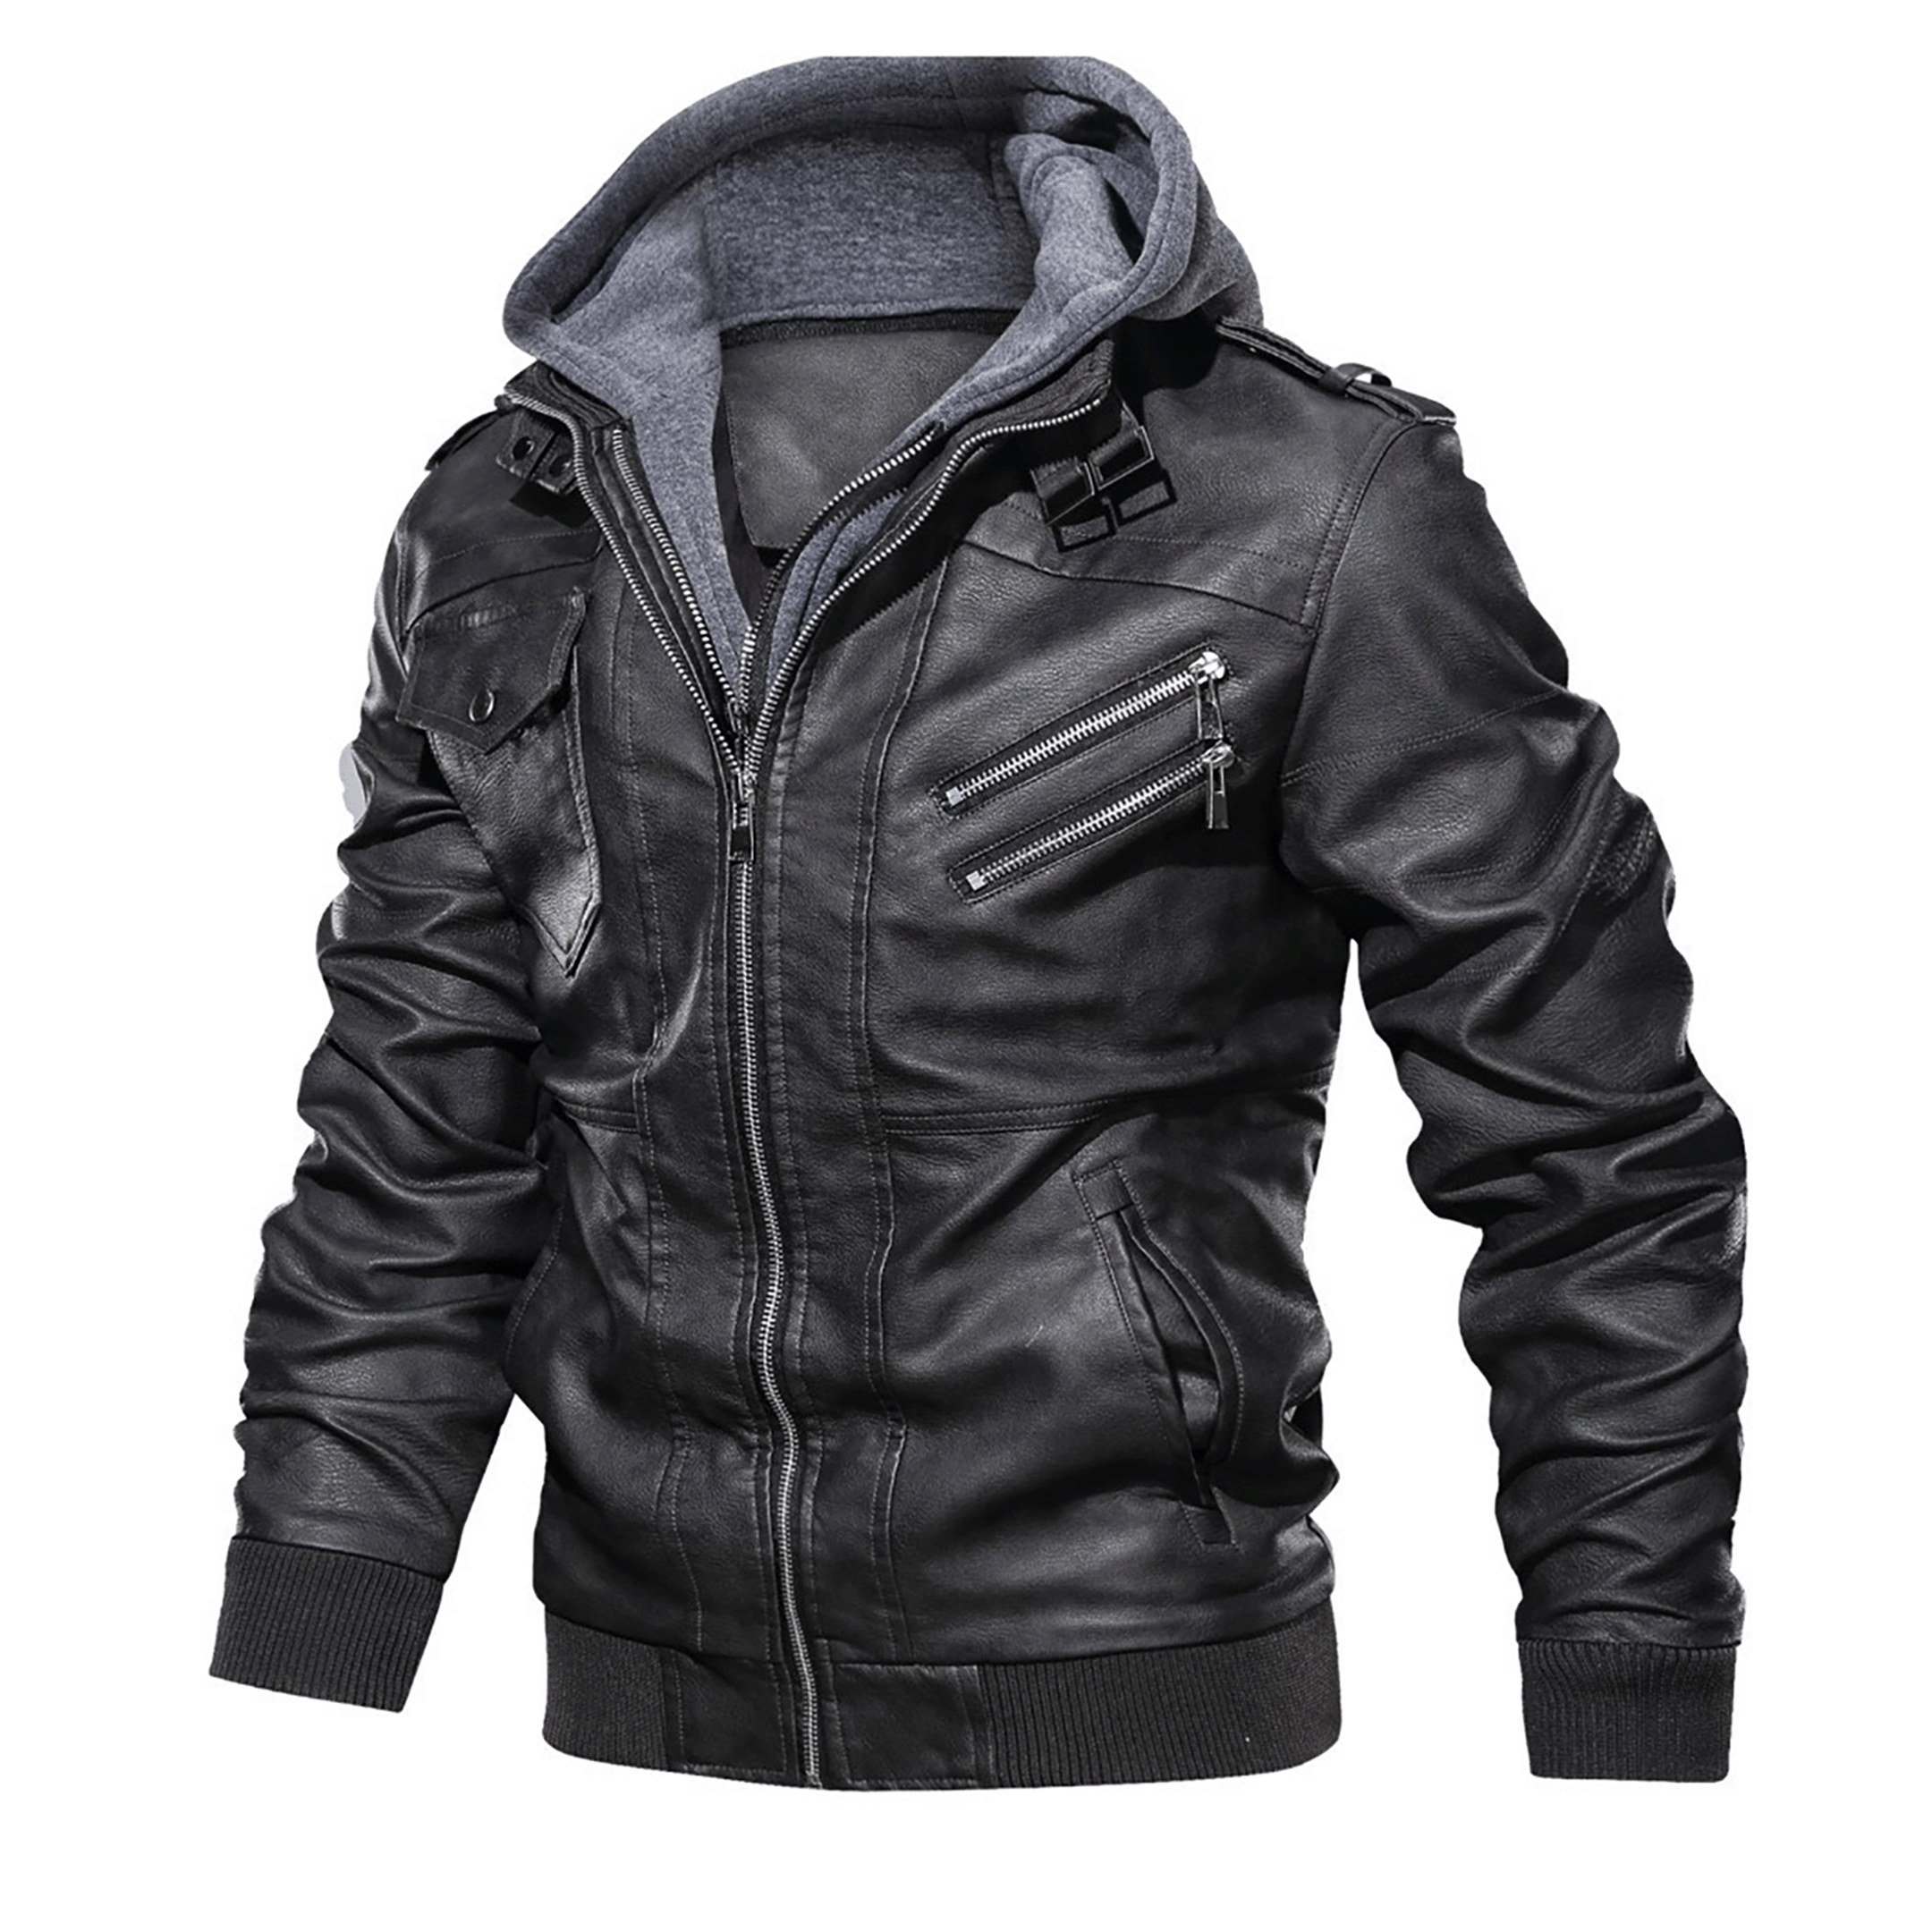 Top leather jackets and latest products 473